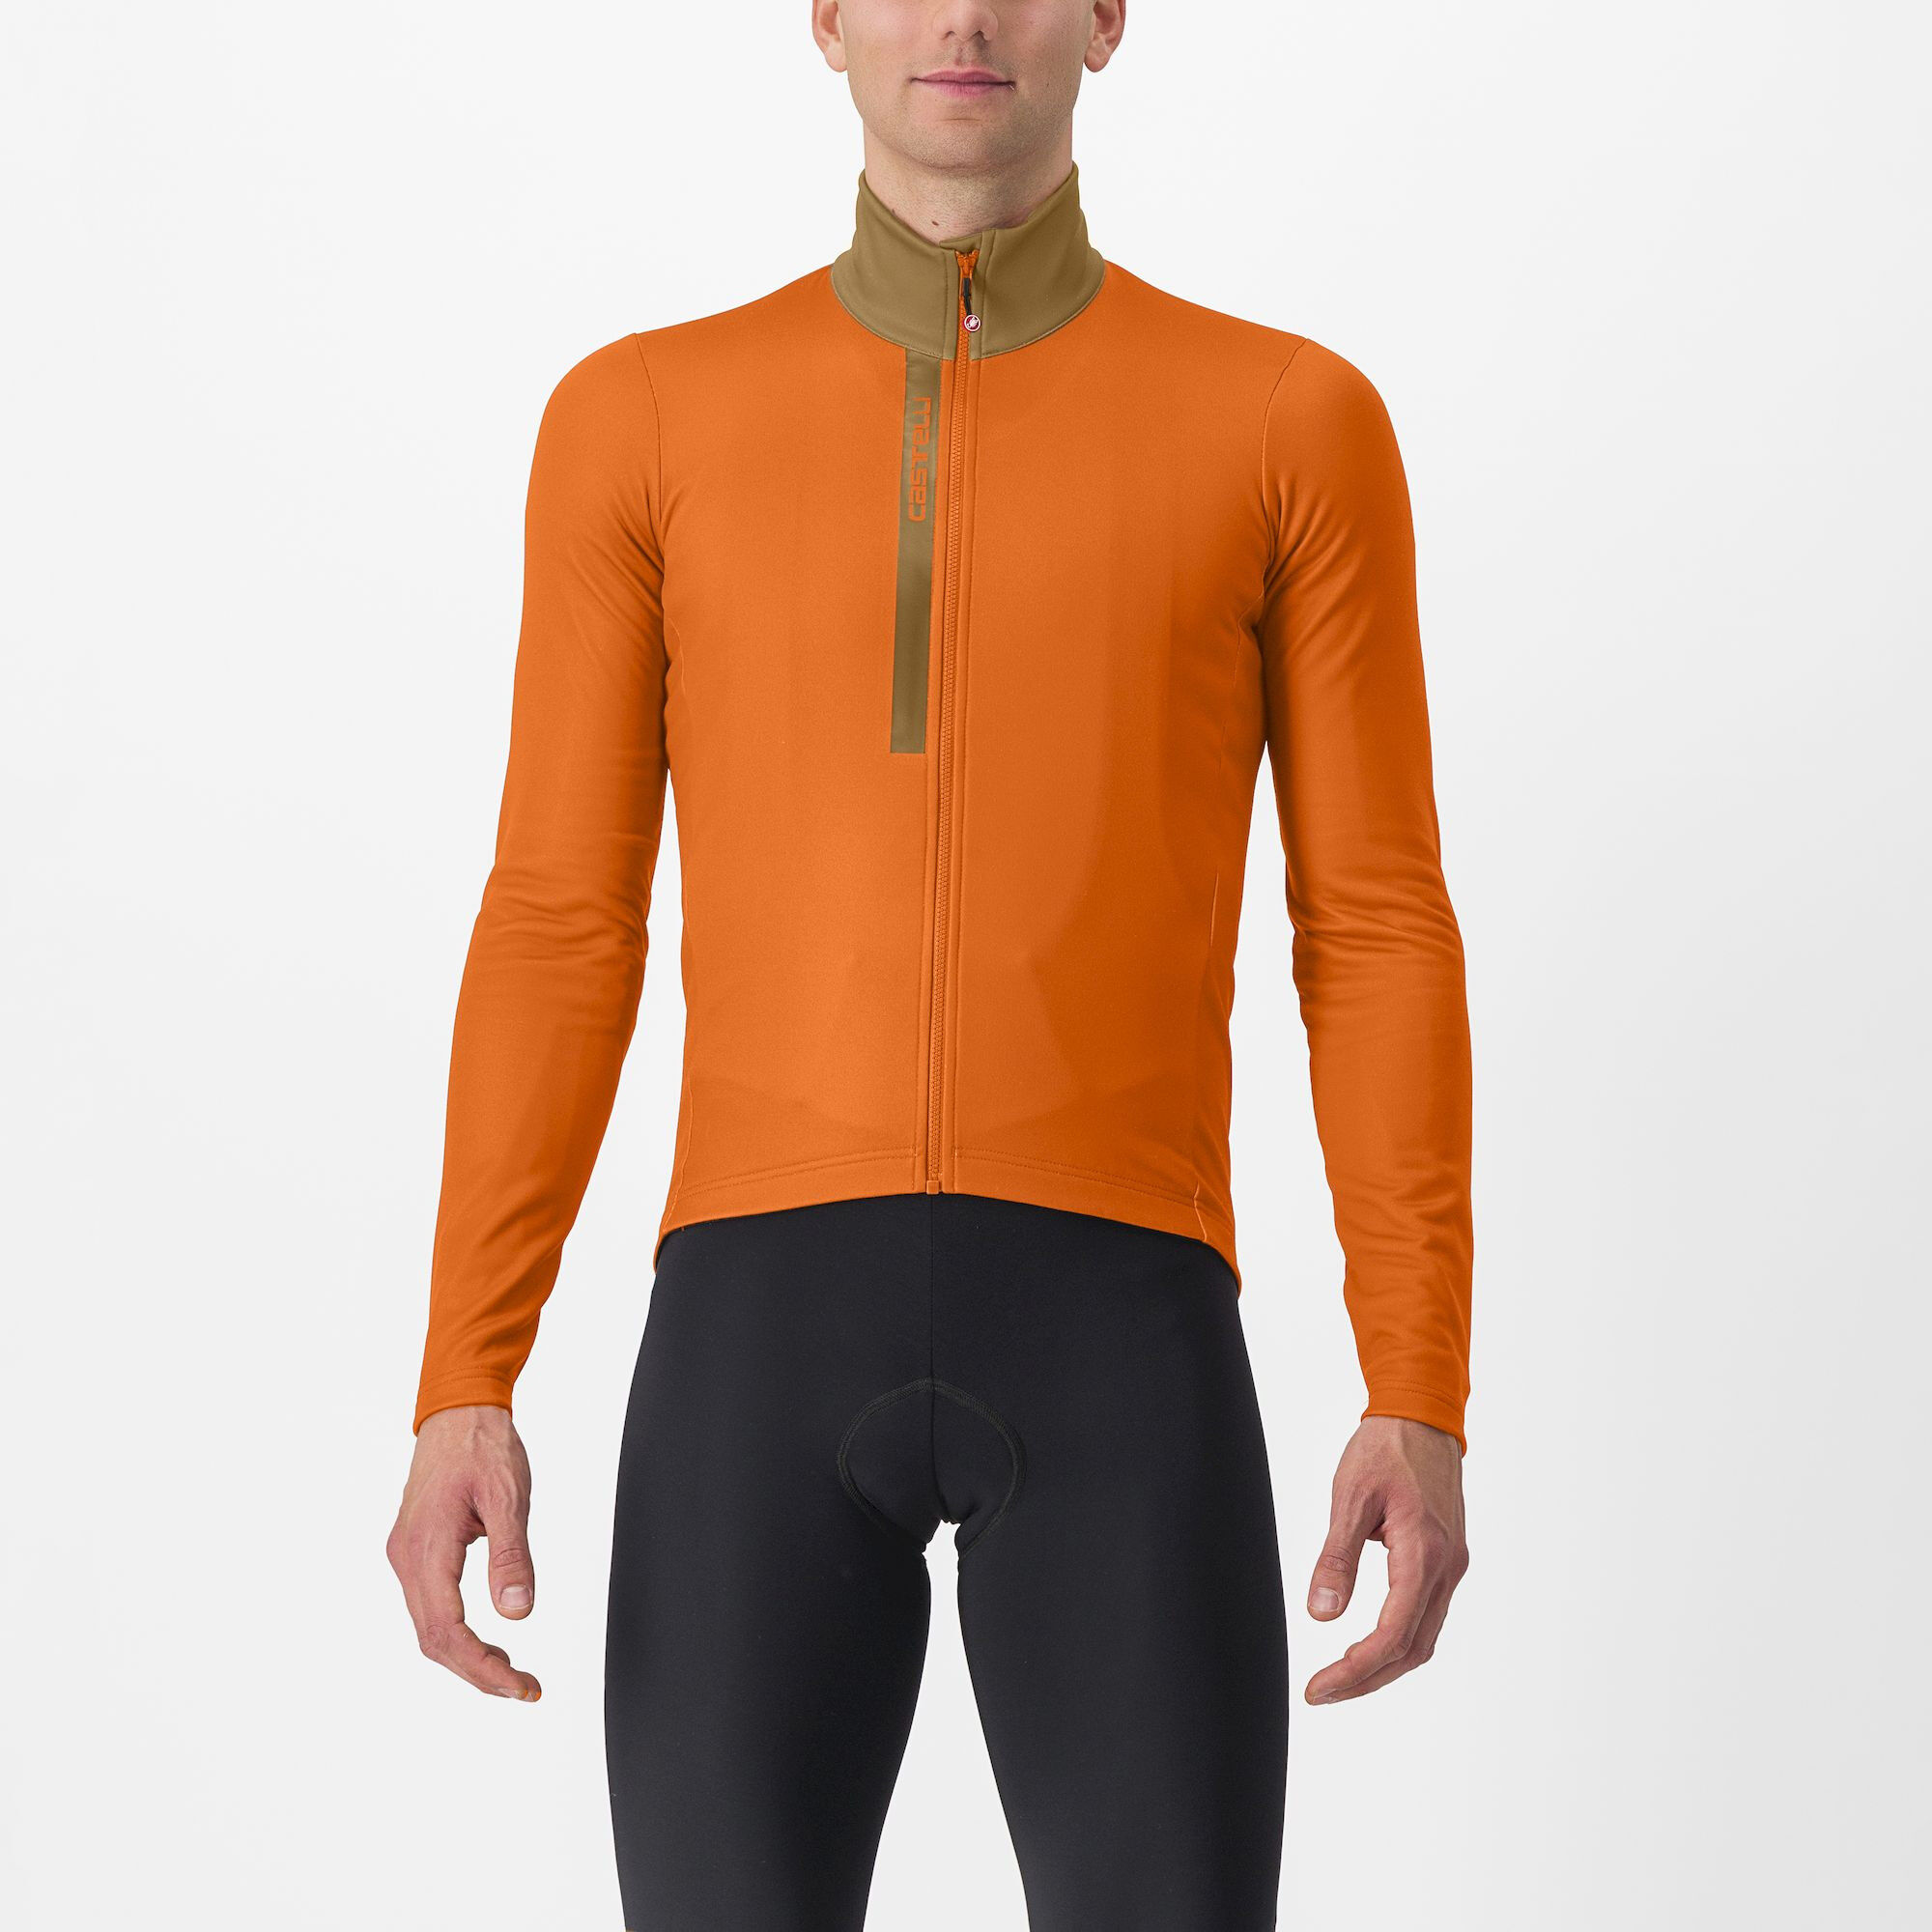 Castelli Entrata Thermal Jersey - Cycling jersey - Men's | Hardloop